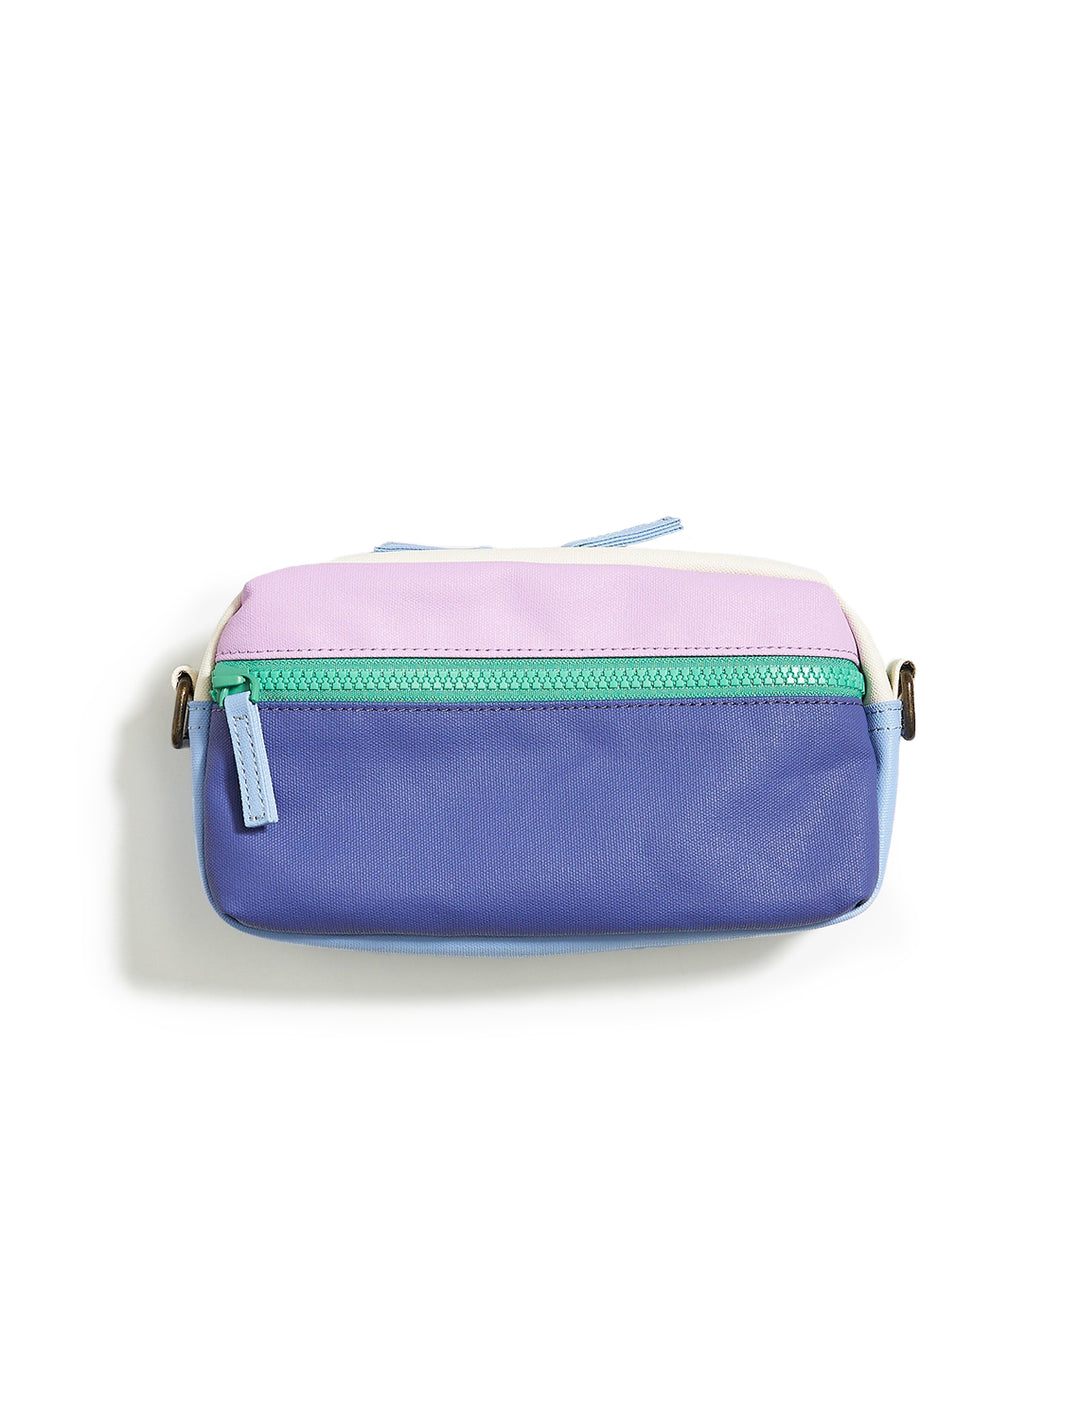 Front view of Marine Layer's fanny pack in lilac colorblock.